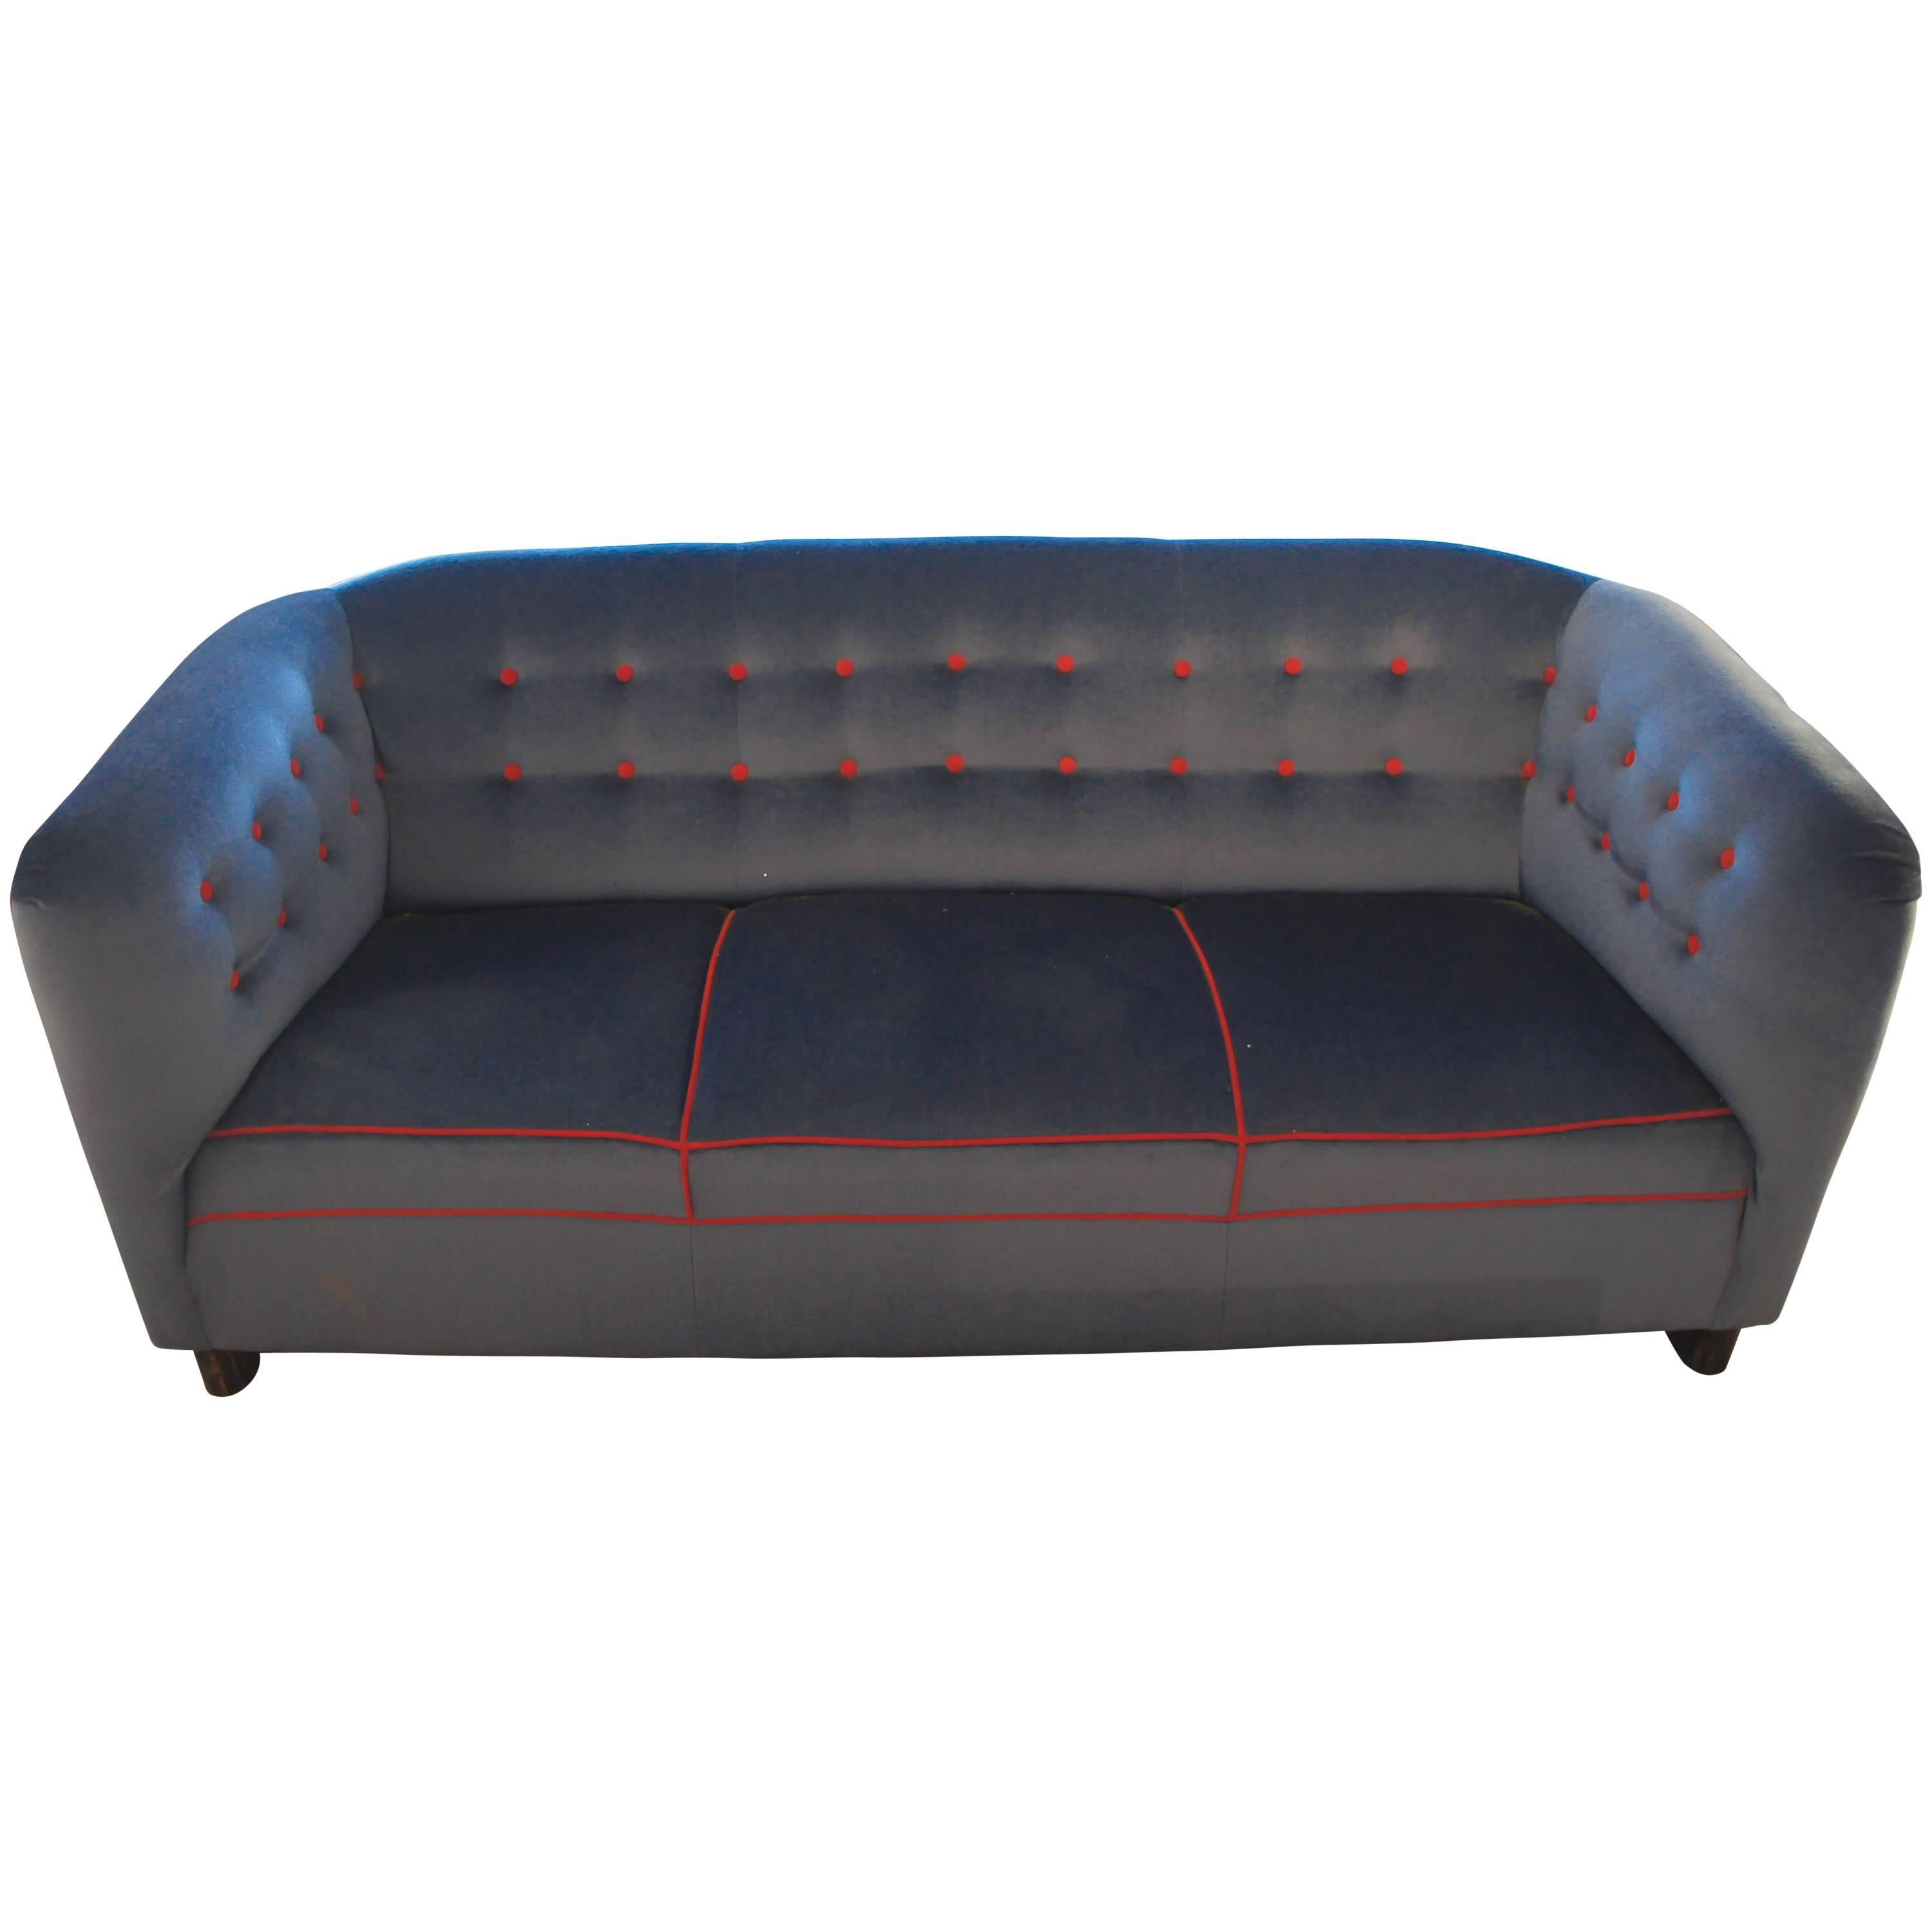 Ole Wanscher Three-Seat Sofa Model 1668 For Sale